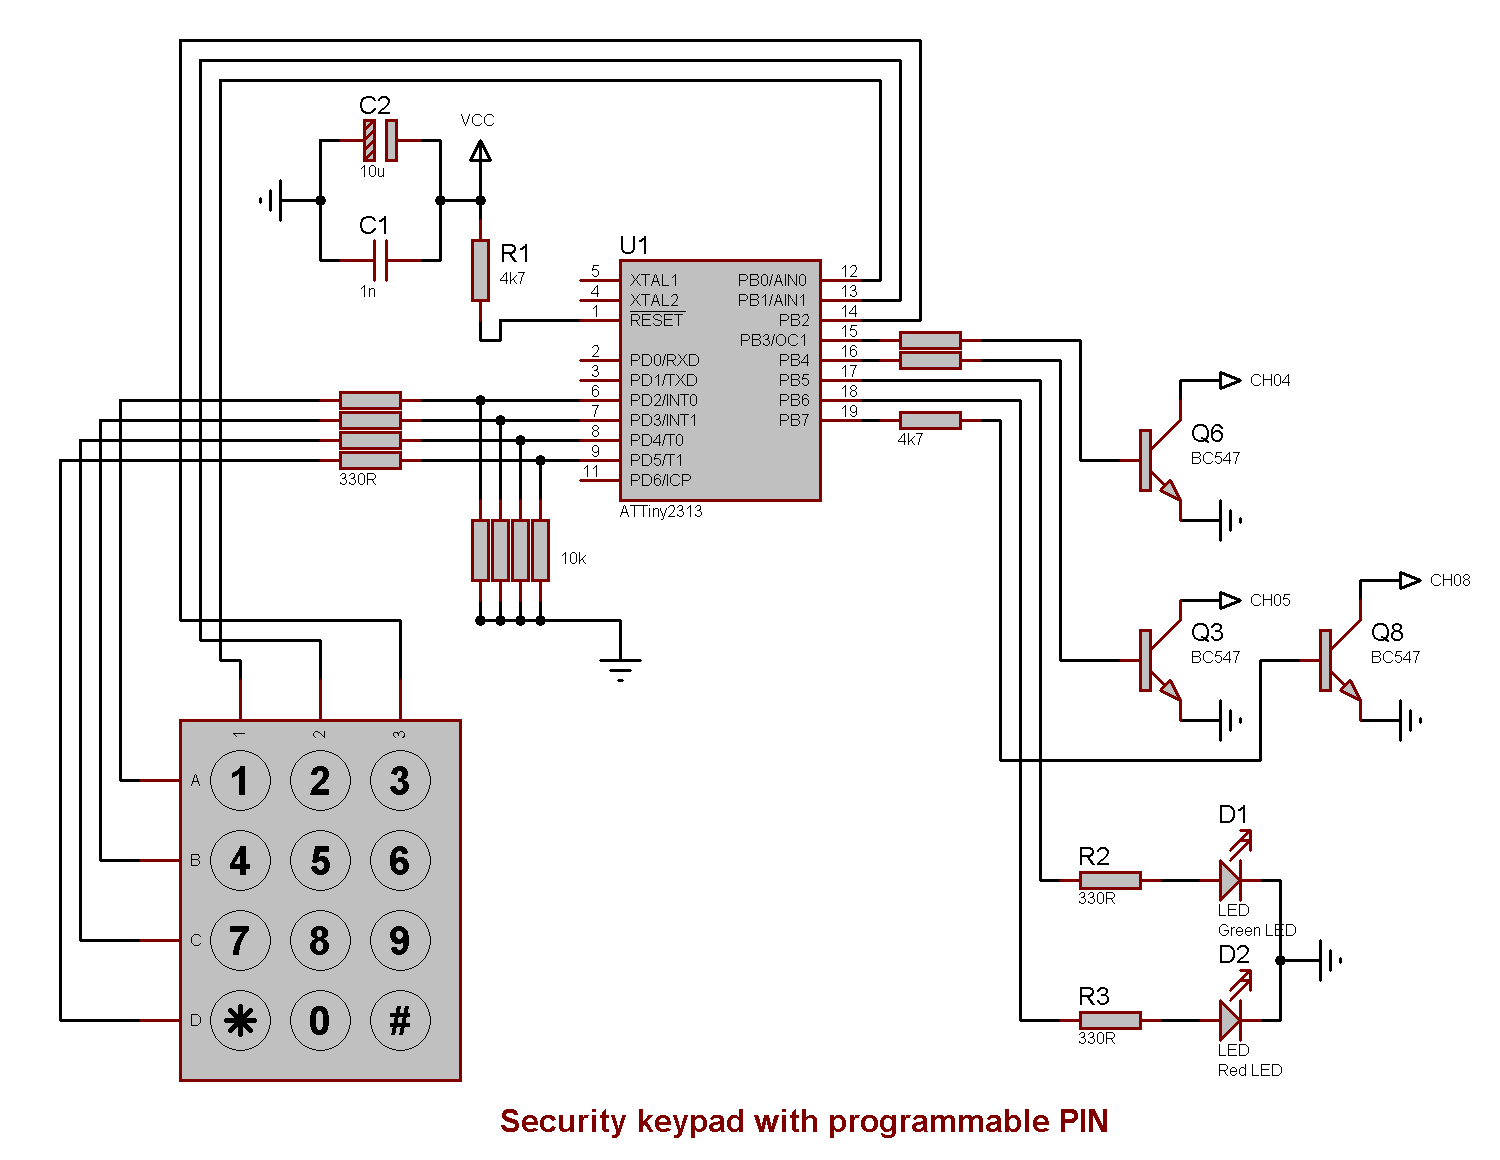 Schematics for the programmable keypad